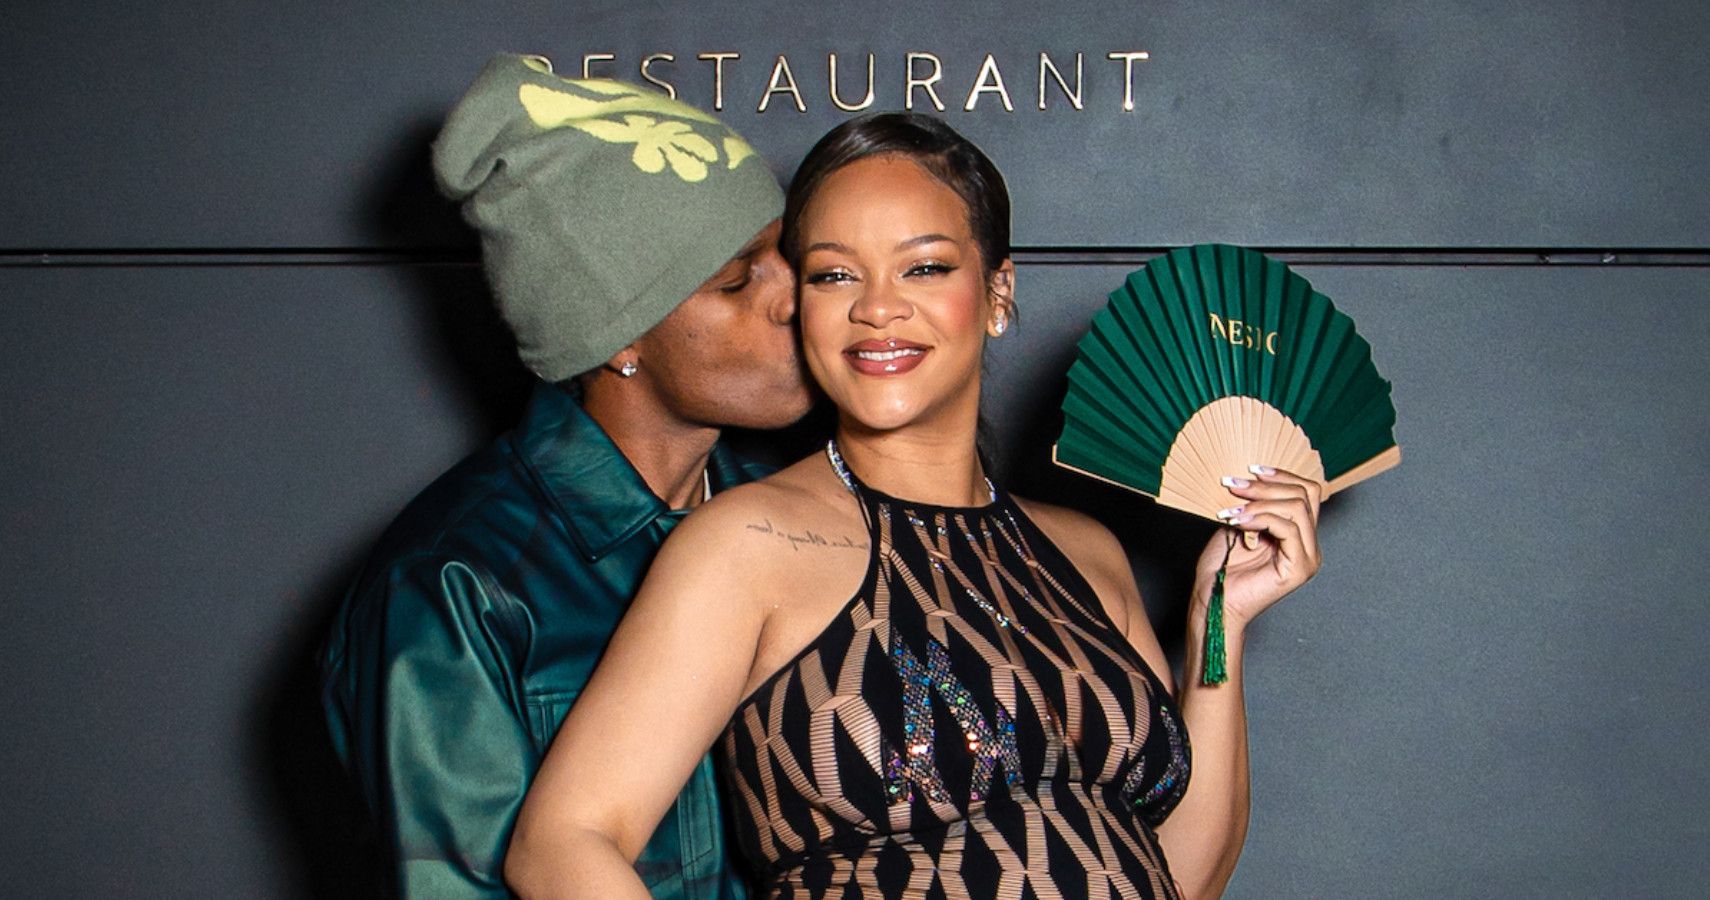 Showing Off For Leo? Rihanna Wears Revealing Outfit Amid Secret